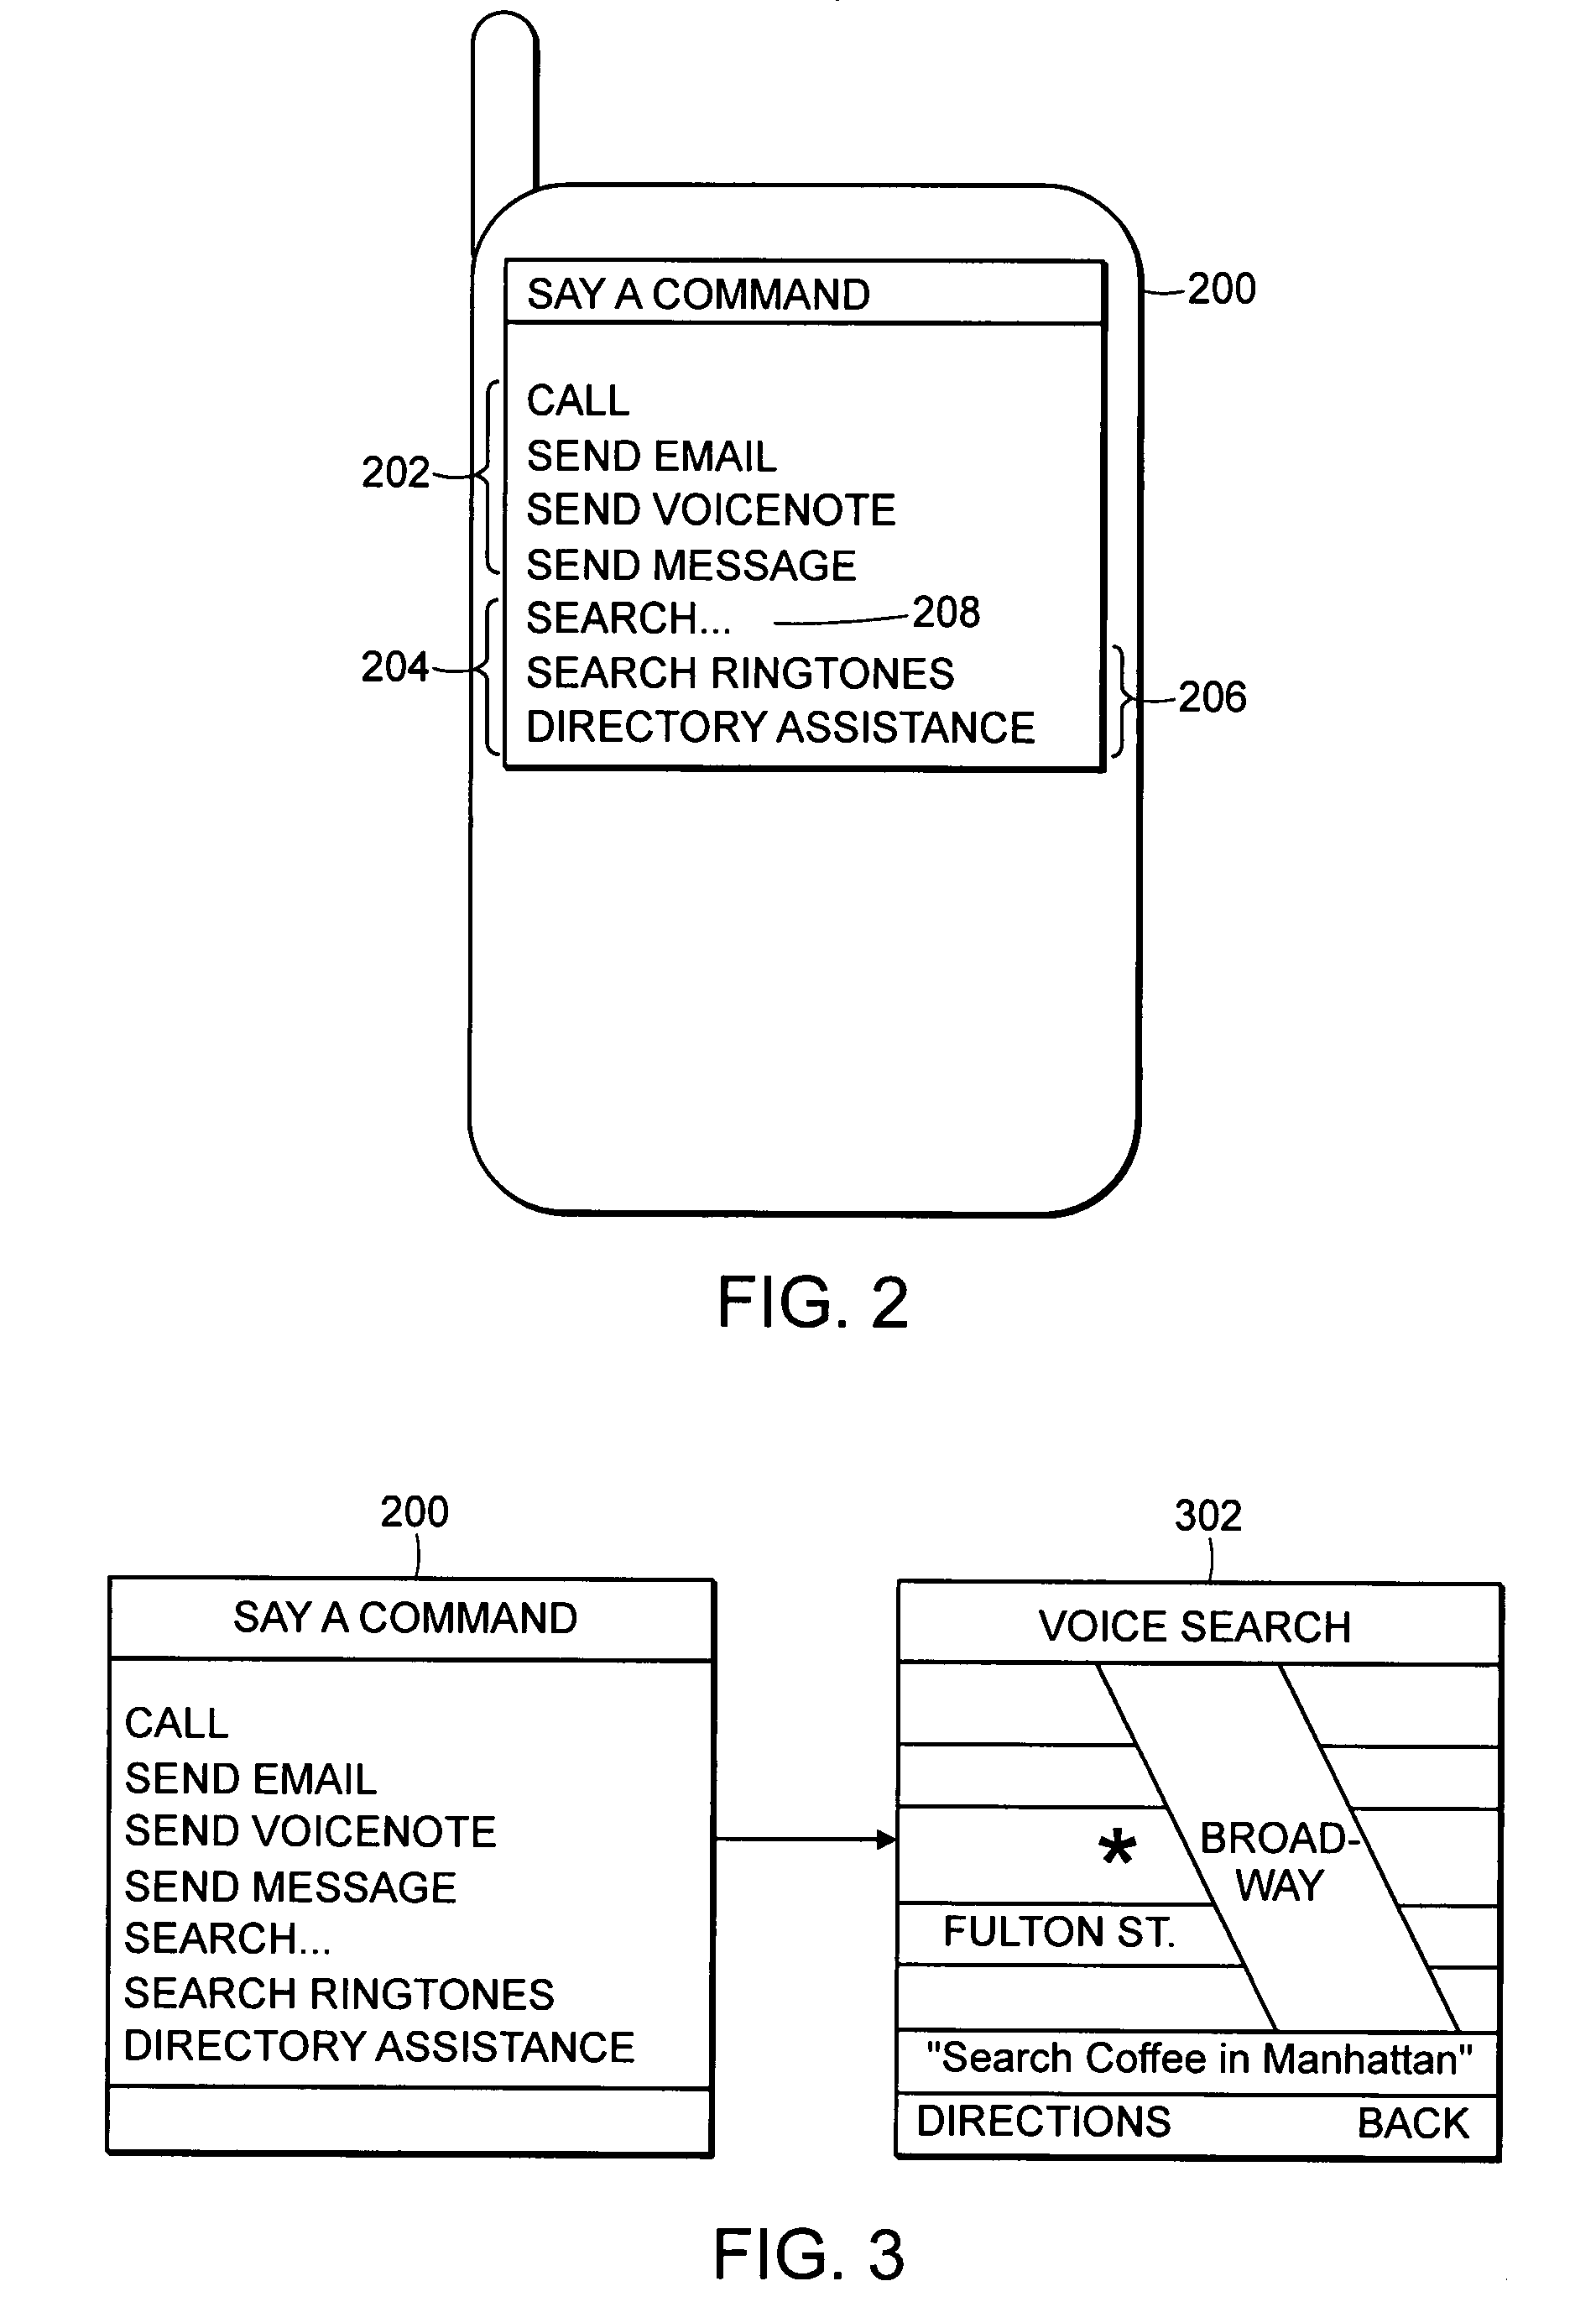 Collection and use of side information in voice-mediated mobile search